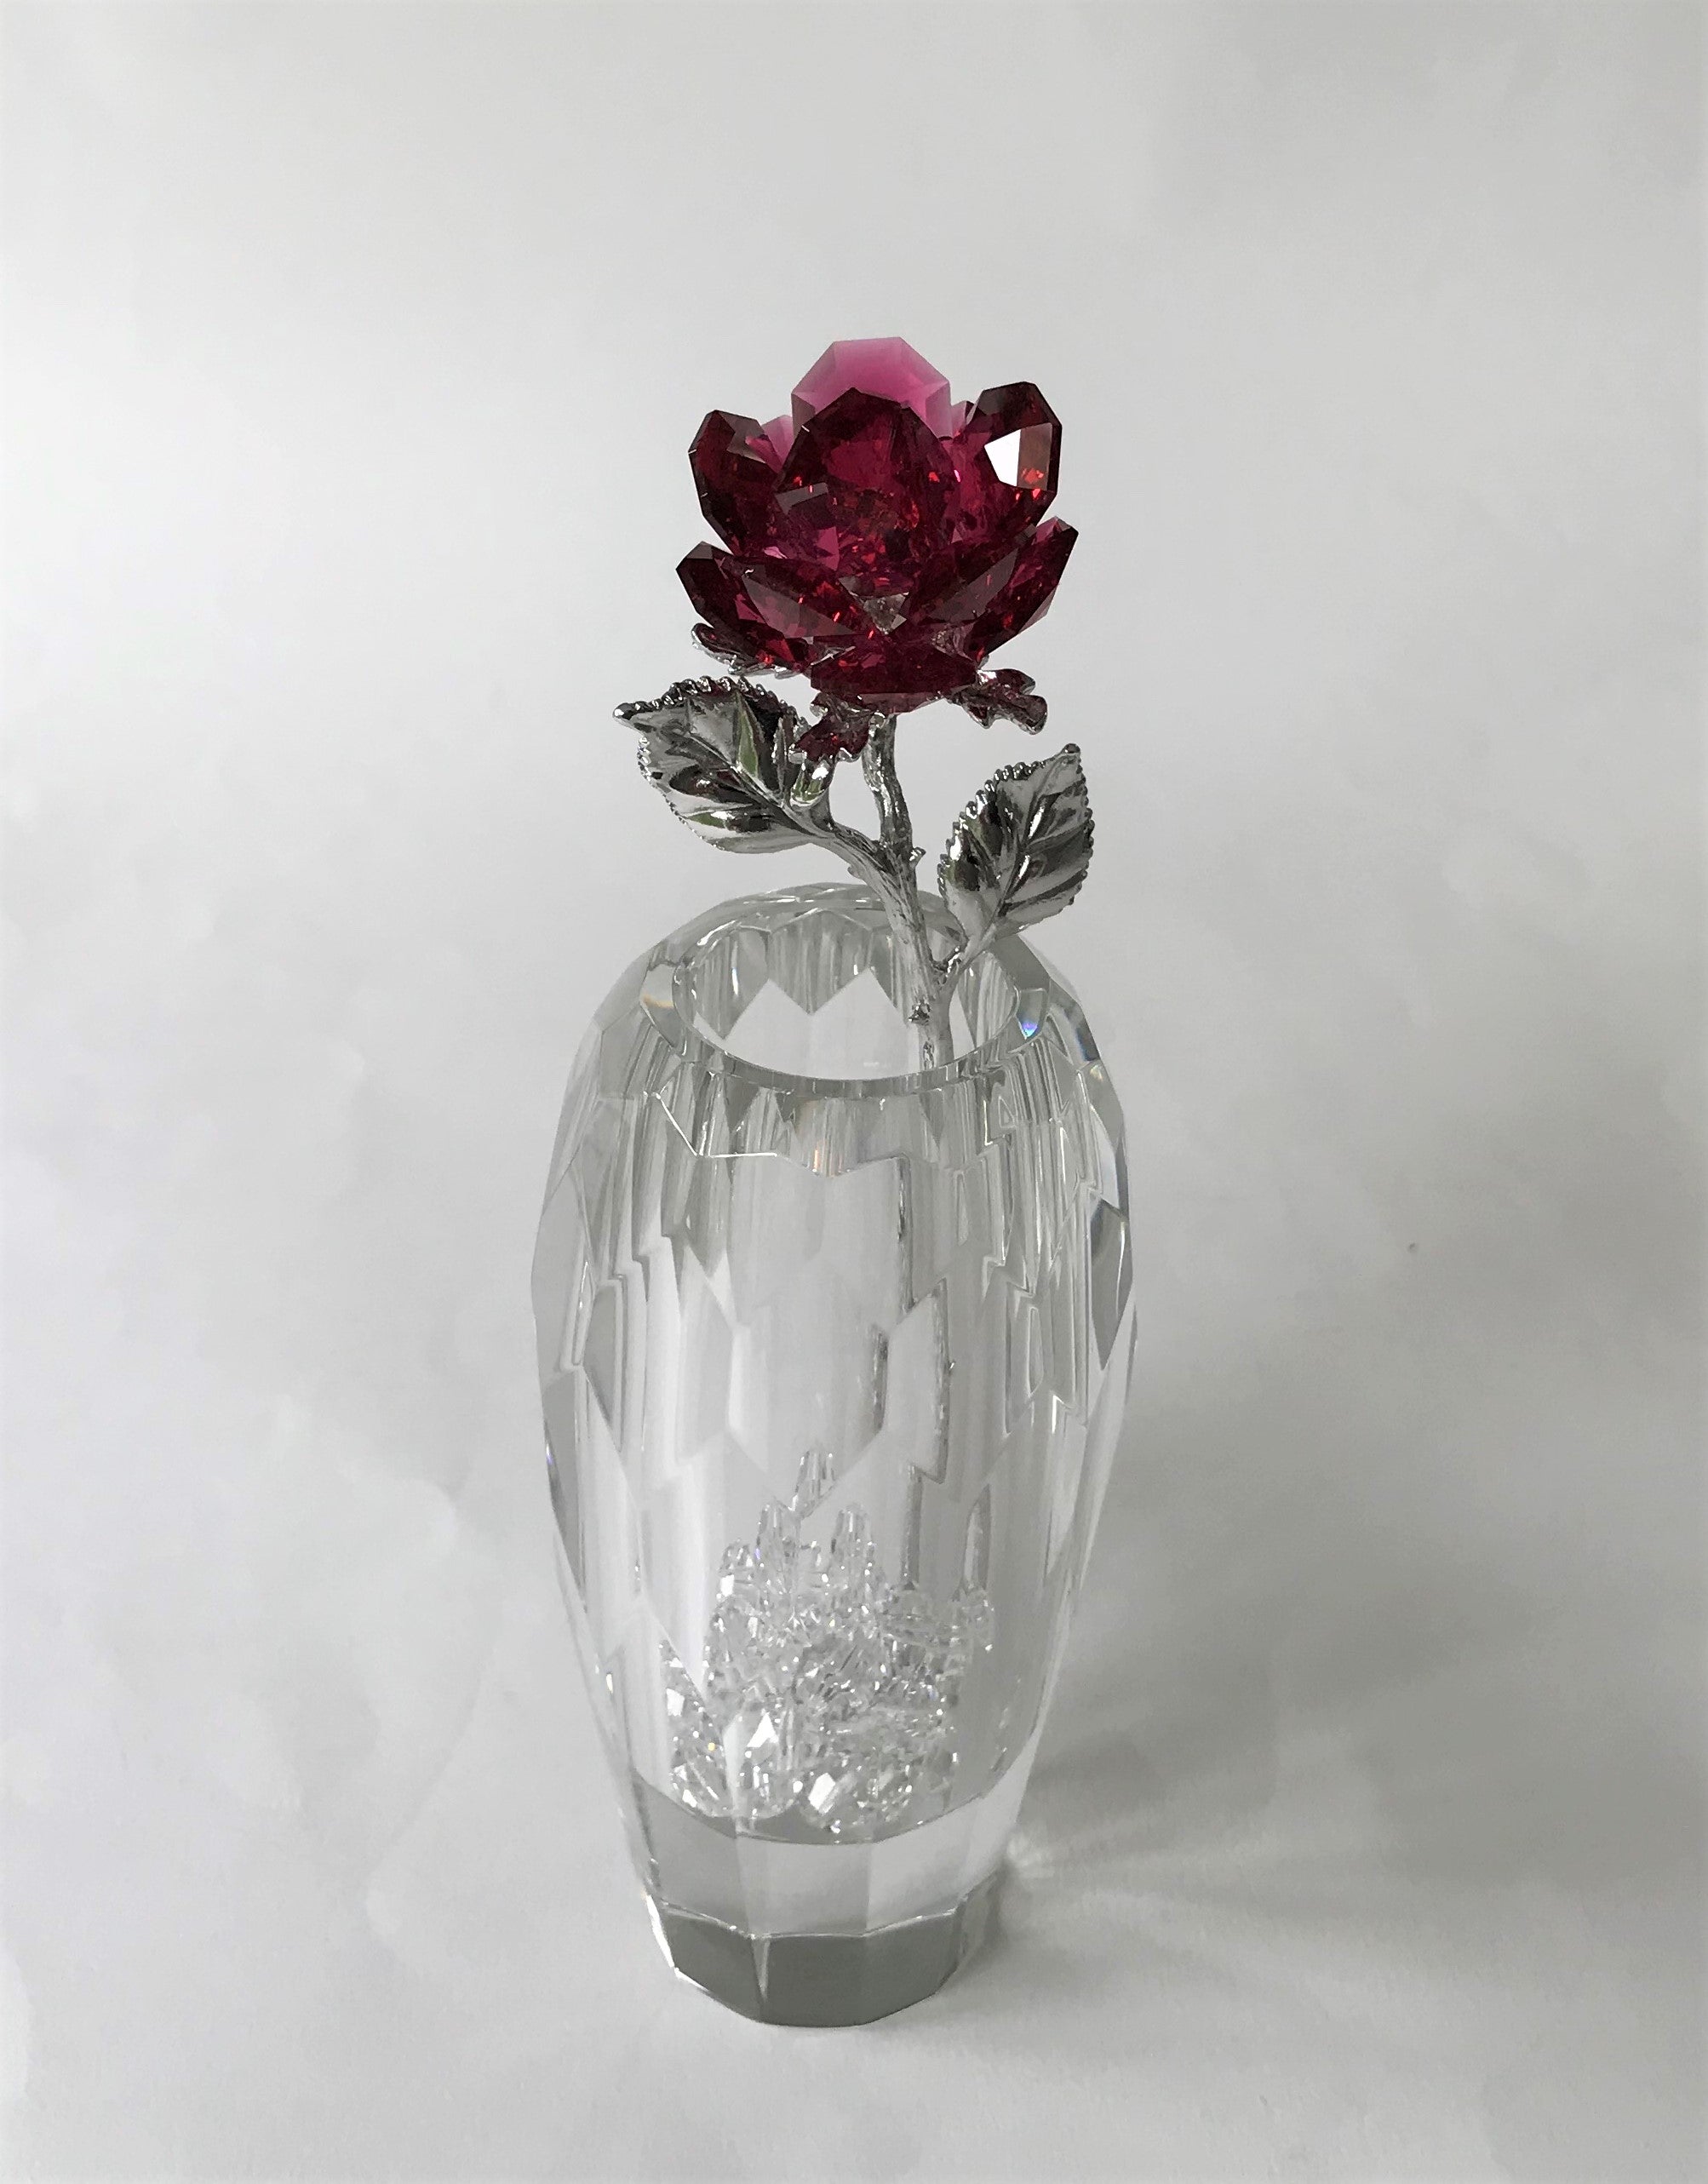 Red Crystal Rose Handcrafted By Bjcrystalgifts Using Swarovski Crystals In A Faceted Crystal Vase